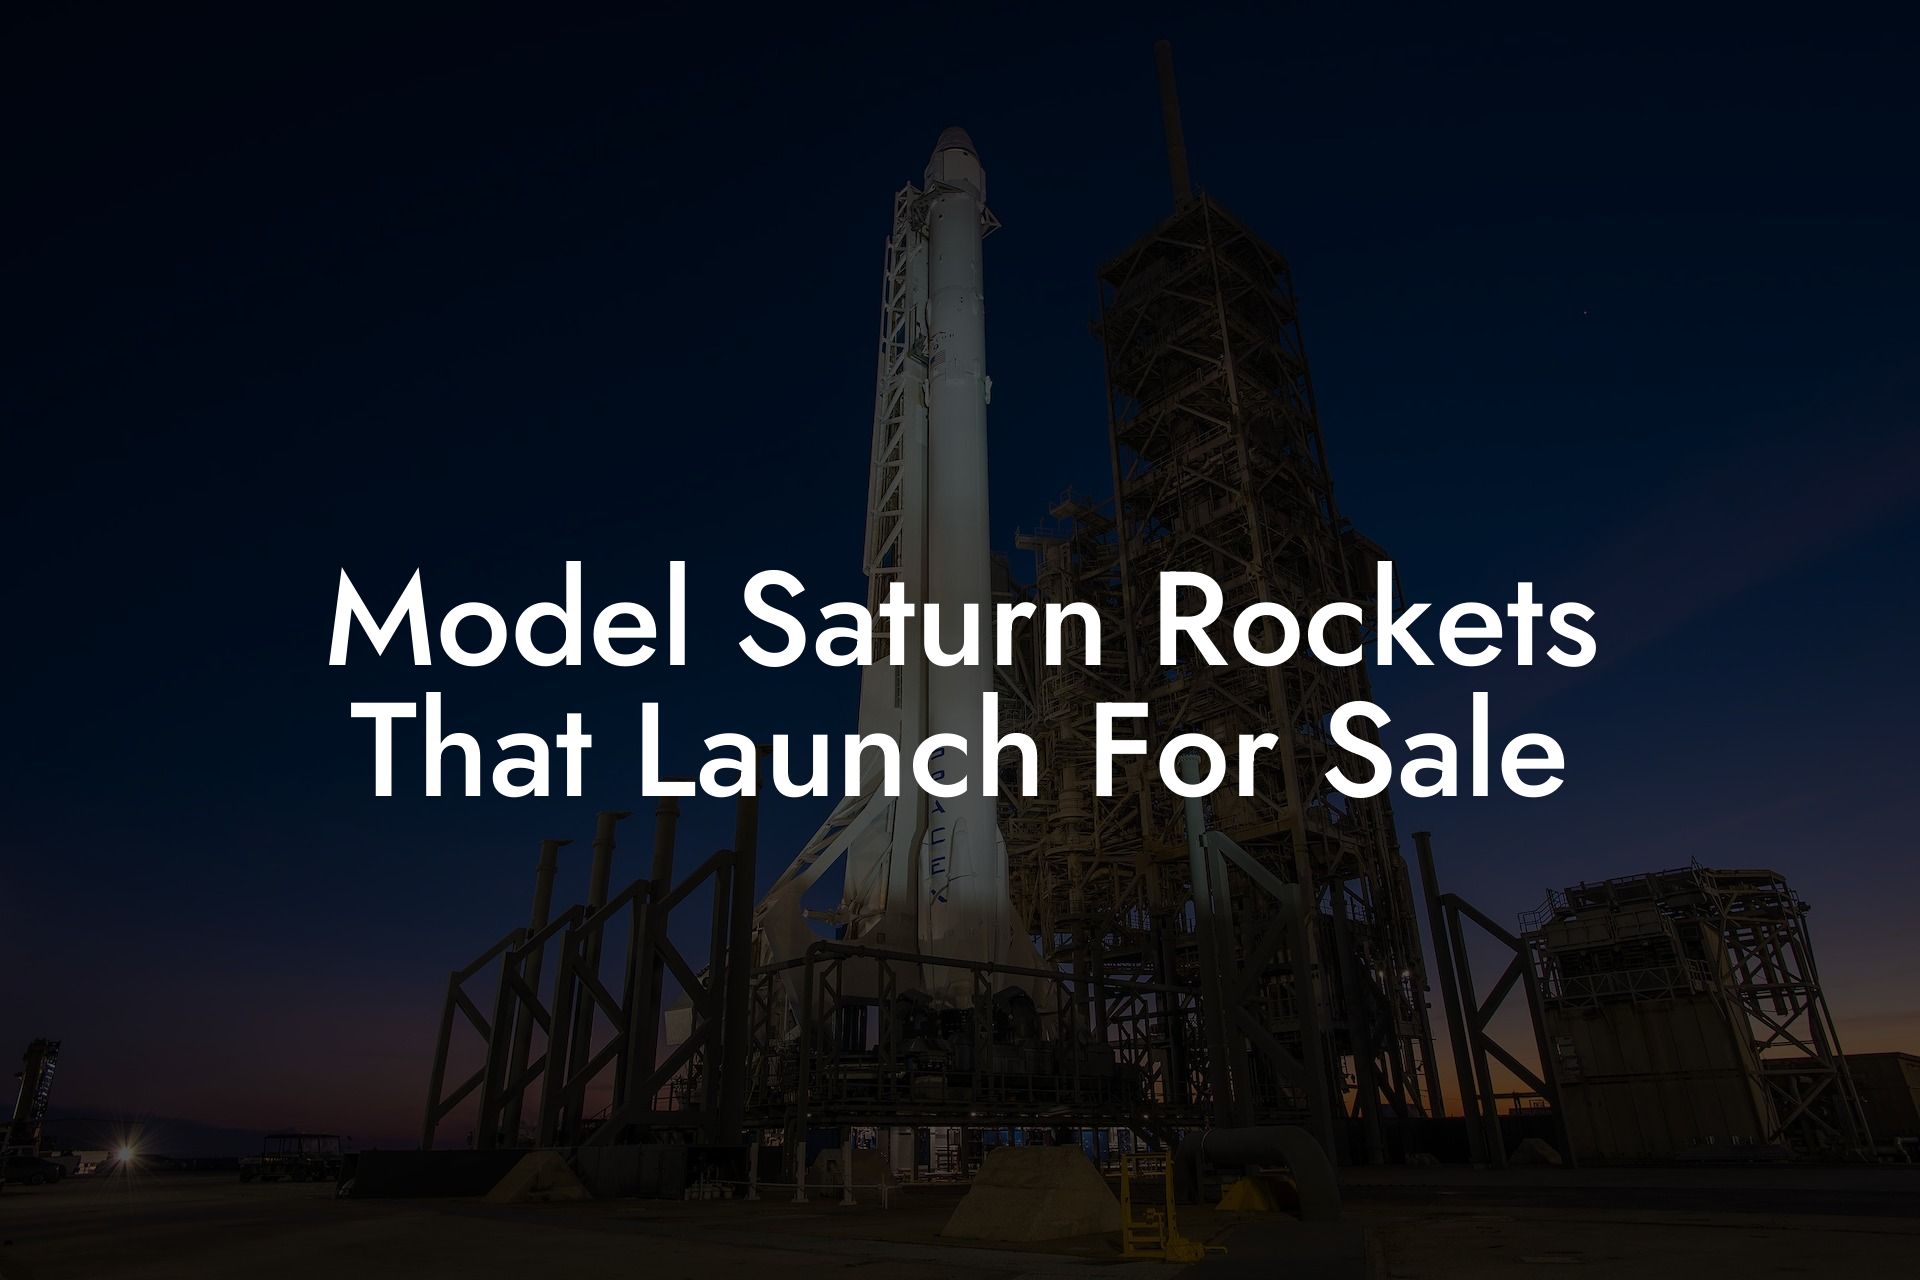 Model Saturn Rockets That Launch For Sale